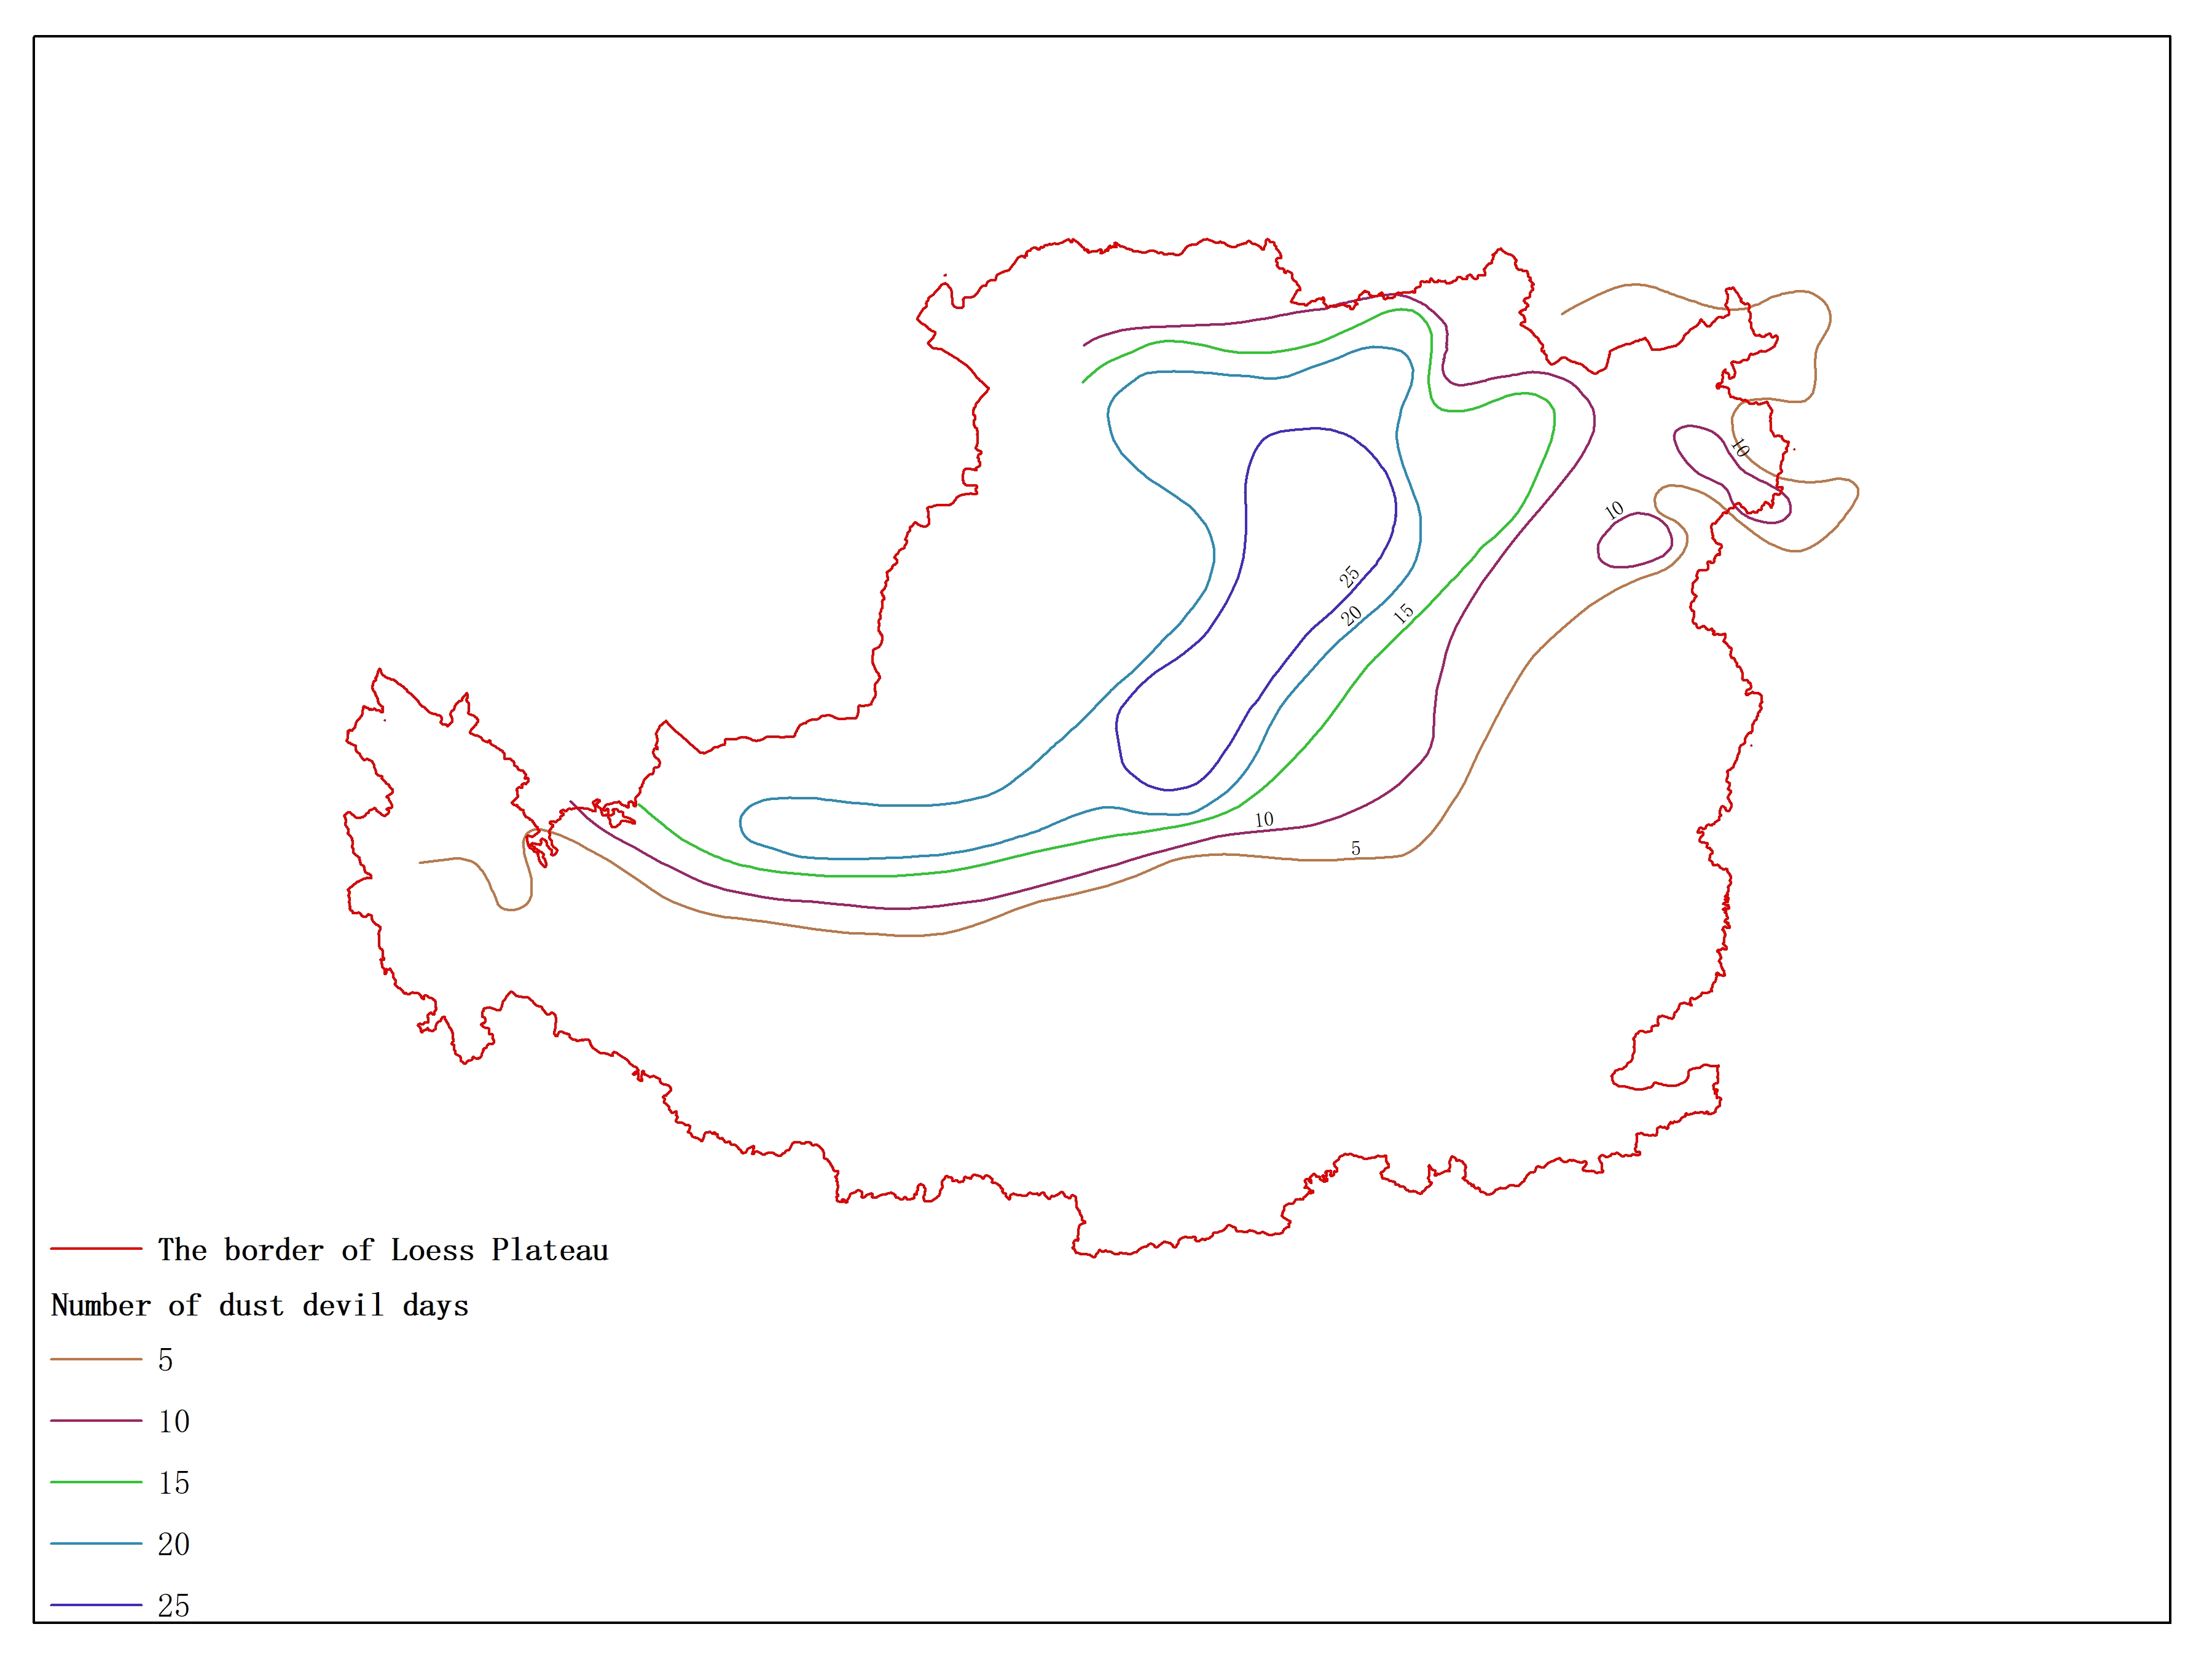 Agricultural climate resource atlas of Loess Plateau-Number of dust devil days